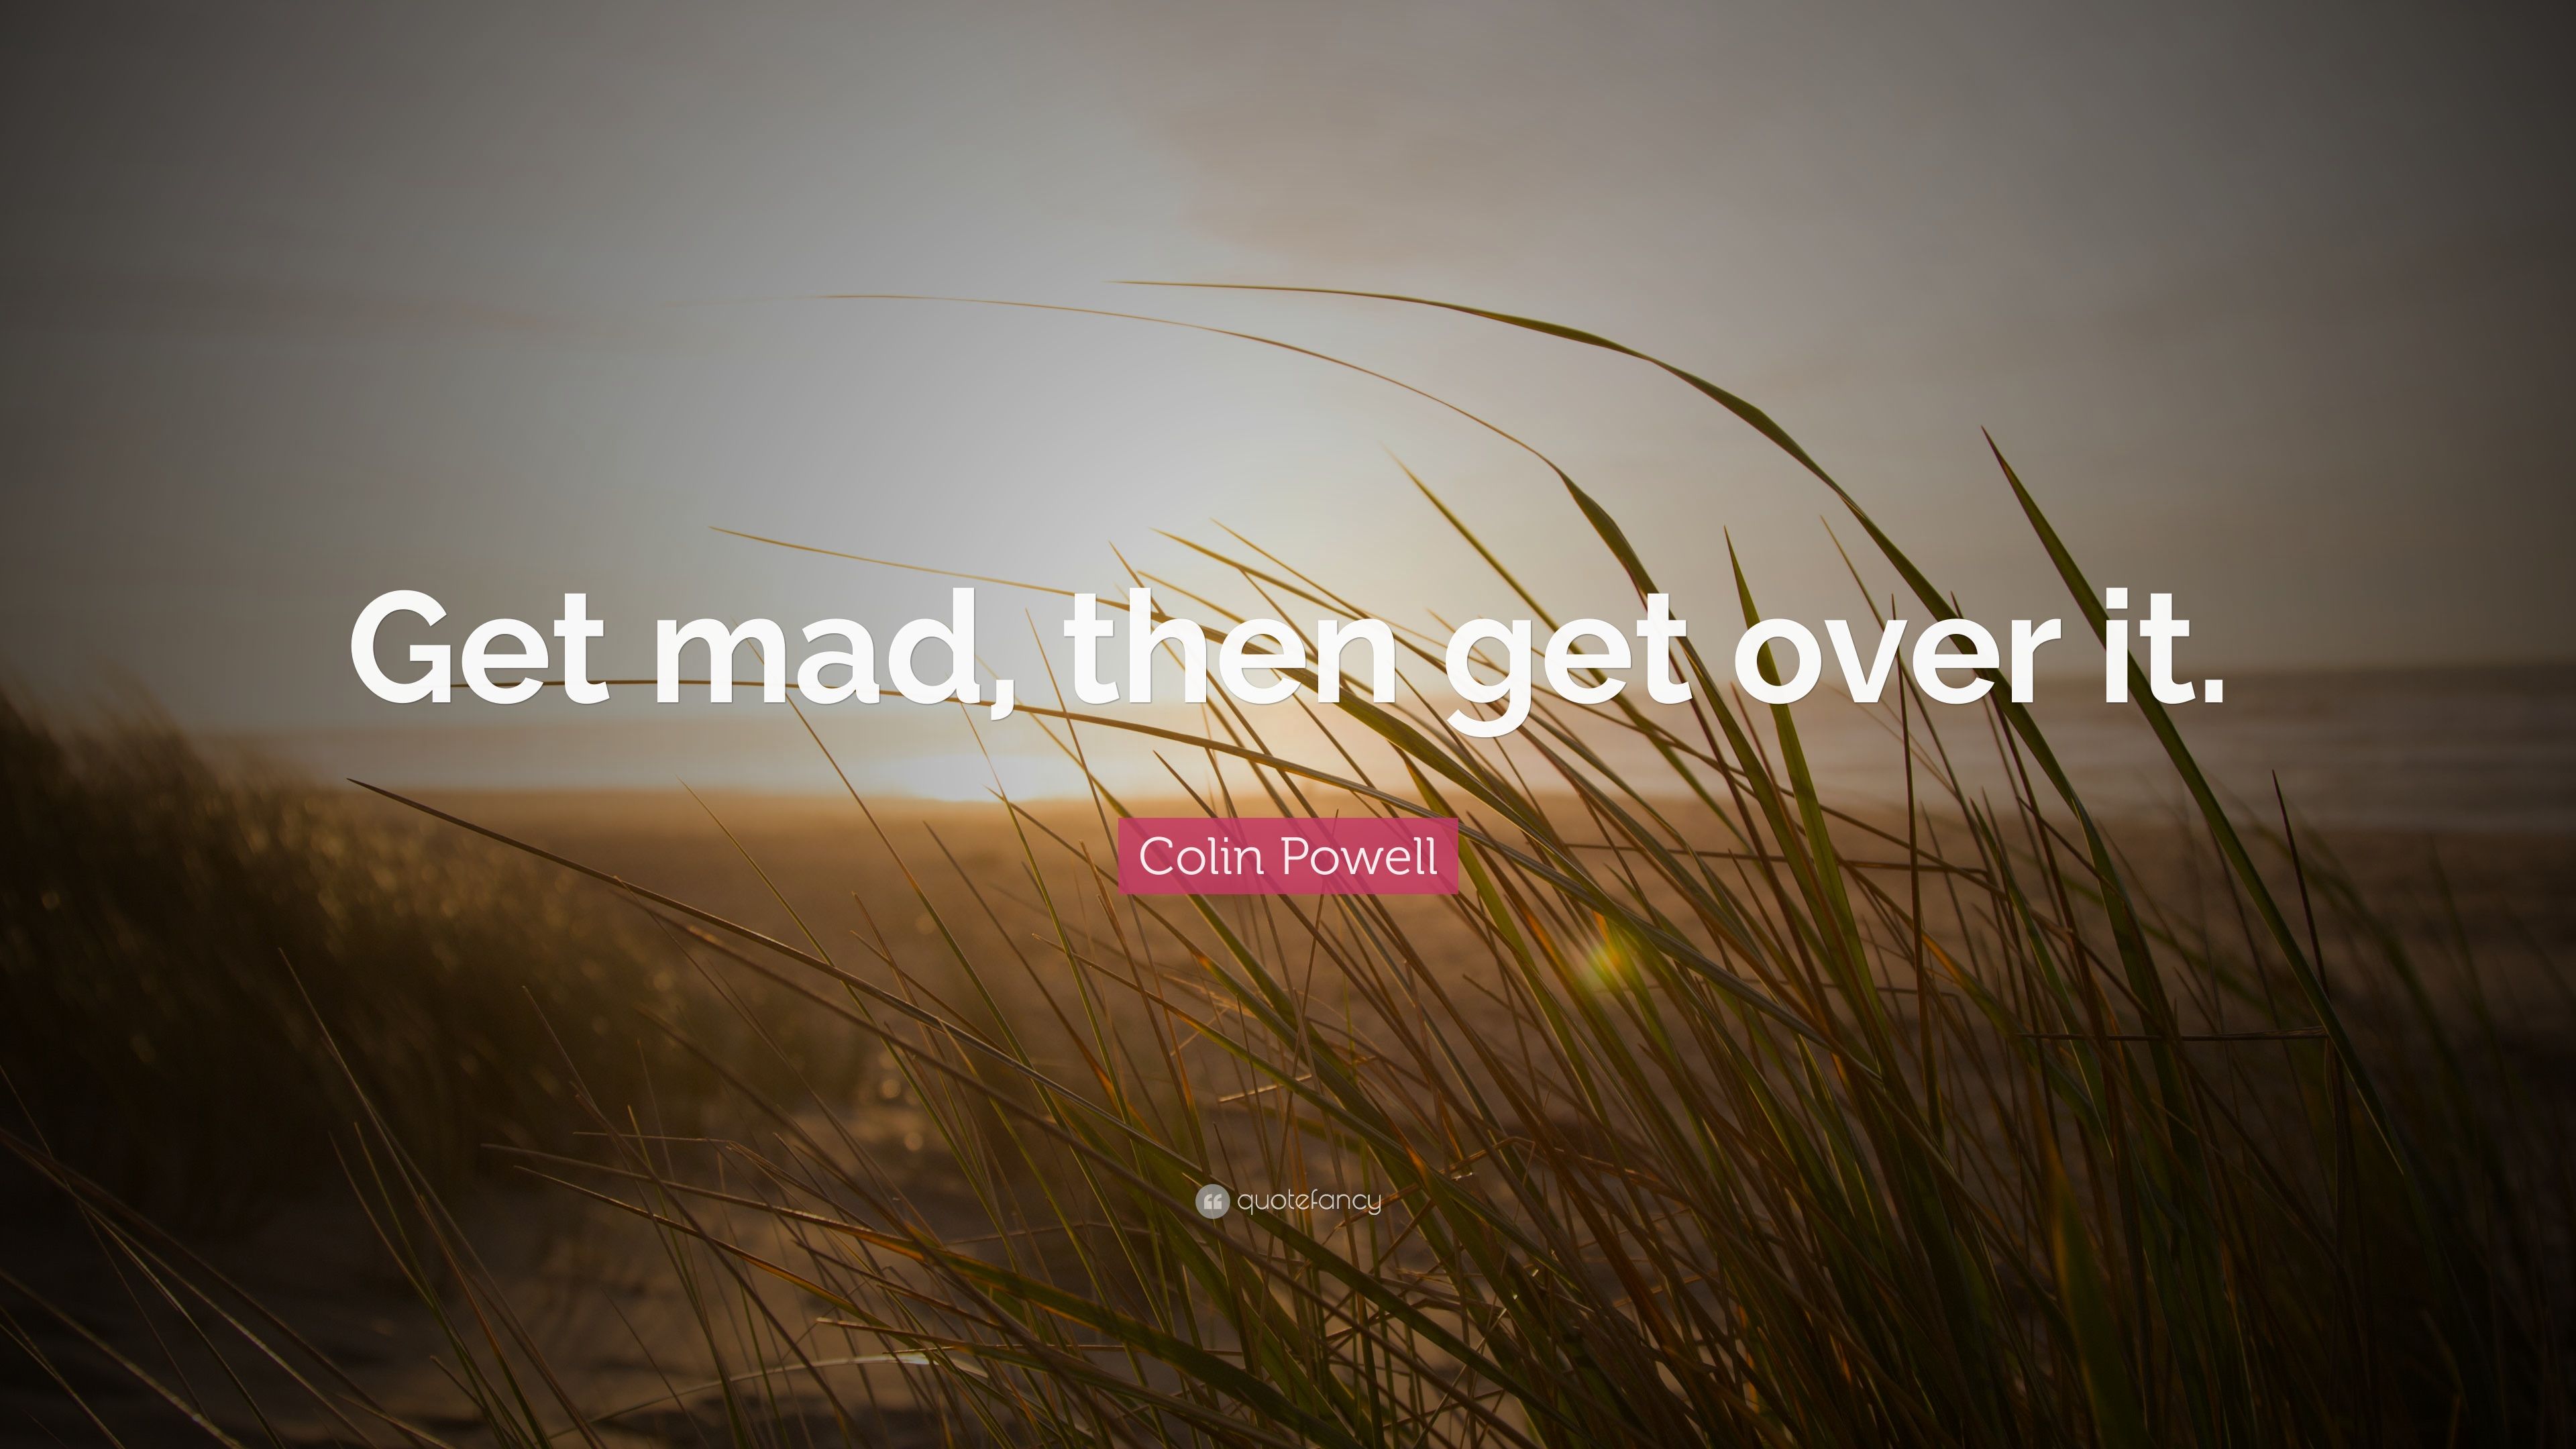 Colin Powell Quote: “Get mad, then get over it.” 24 wallpaper